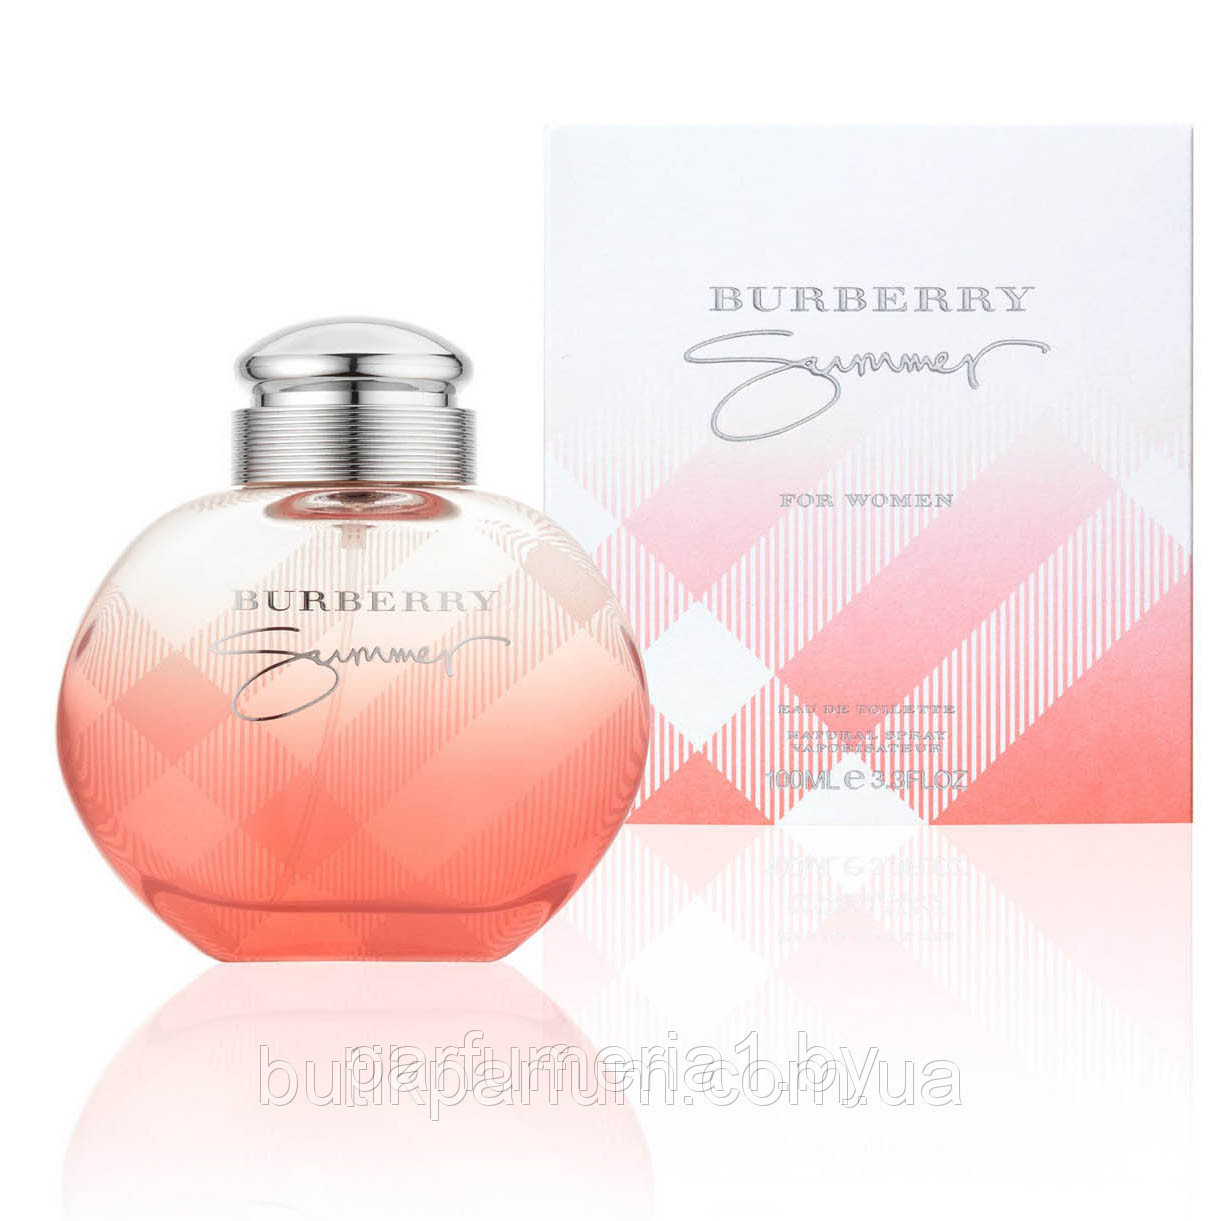 Burberry Summer for Women - фото 1 - id-p73733805